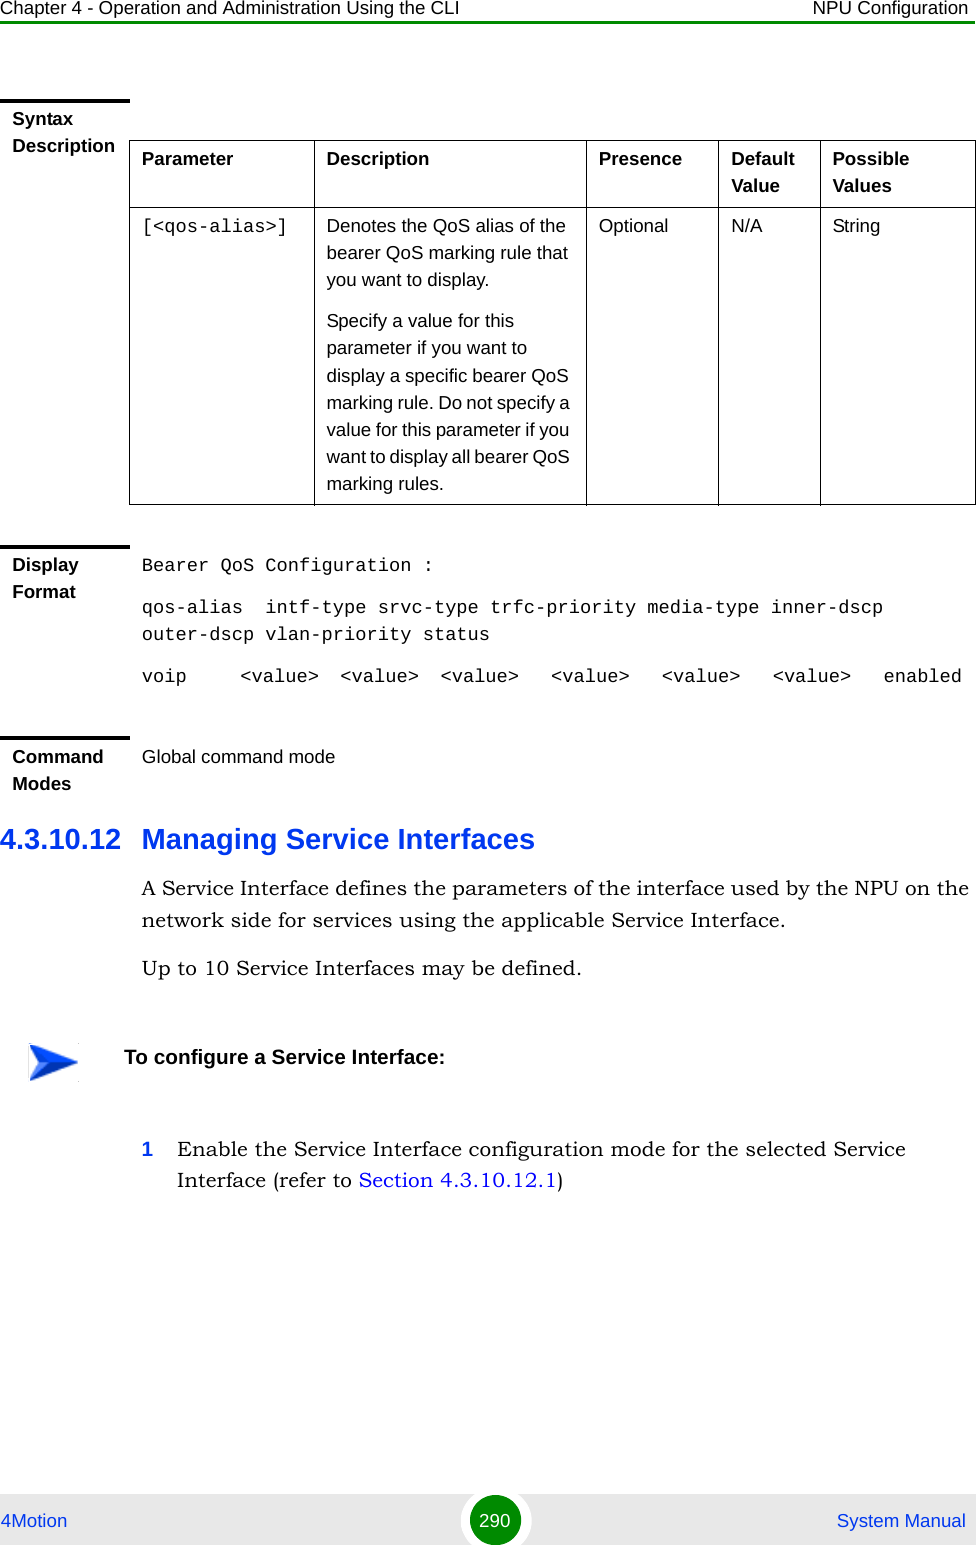 Chapter 4 - Operation and Administration Using the CLI NPU Configuration4Motion 290  System Manual4.3.10.12 Managing Service InterfacesA Service Interface defines the parameters of the interface used by the NPU on the network side for services using the applicable Service Interface.Up to 10 Service Interfaces may be defined. 1Enable the Service Interface configuration mode for the selected Service Interface (refer to Section 4.3.10.12.1)Syntax Description Parameter Description Presence Default ValuePossible Values[&lt;qos-alias&gt;] Denotes the QoS alias of the bearer QoS marking rule that you want to display. Specify a value for this parameter if you want to display a specific bearer QoS marking rule. Do not specify a value for this parameter if you want to display all bearer QoS marking rules.Optional N/A StringDisplay FormatBearer QoS Configuration :qos-alias  intf-type srvc-type trfc-priority media-type inner-dscp outer-dscp vlan-priority statusvoip     &lt;value&gt;  &lt;value&gt;  &lt;value&gt;   &lt;value&gt;   &lt;value&gt;   &lt;value&gt;   enabledCommand ModesGlobal command modeTo configure a Service Interface: